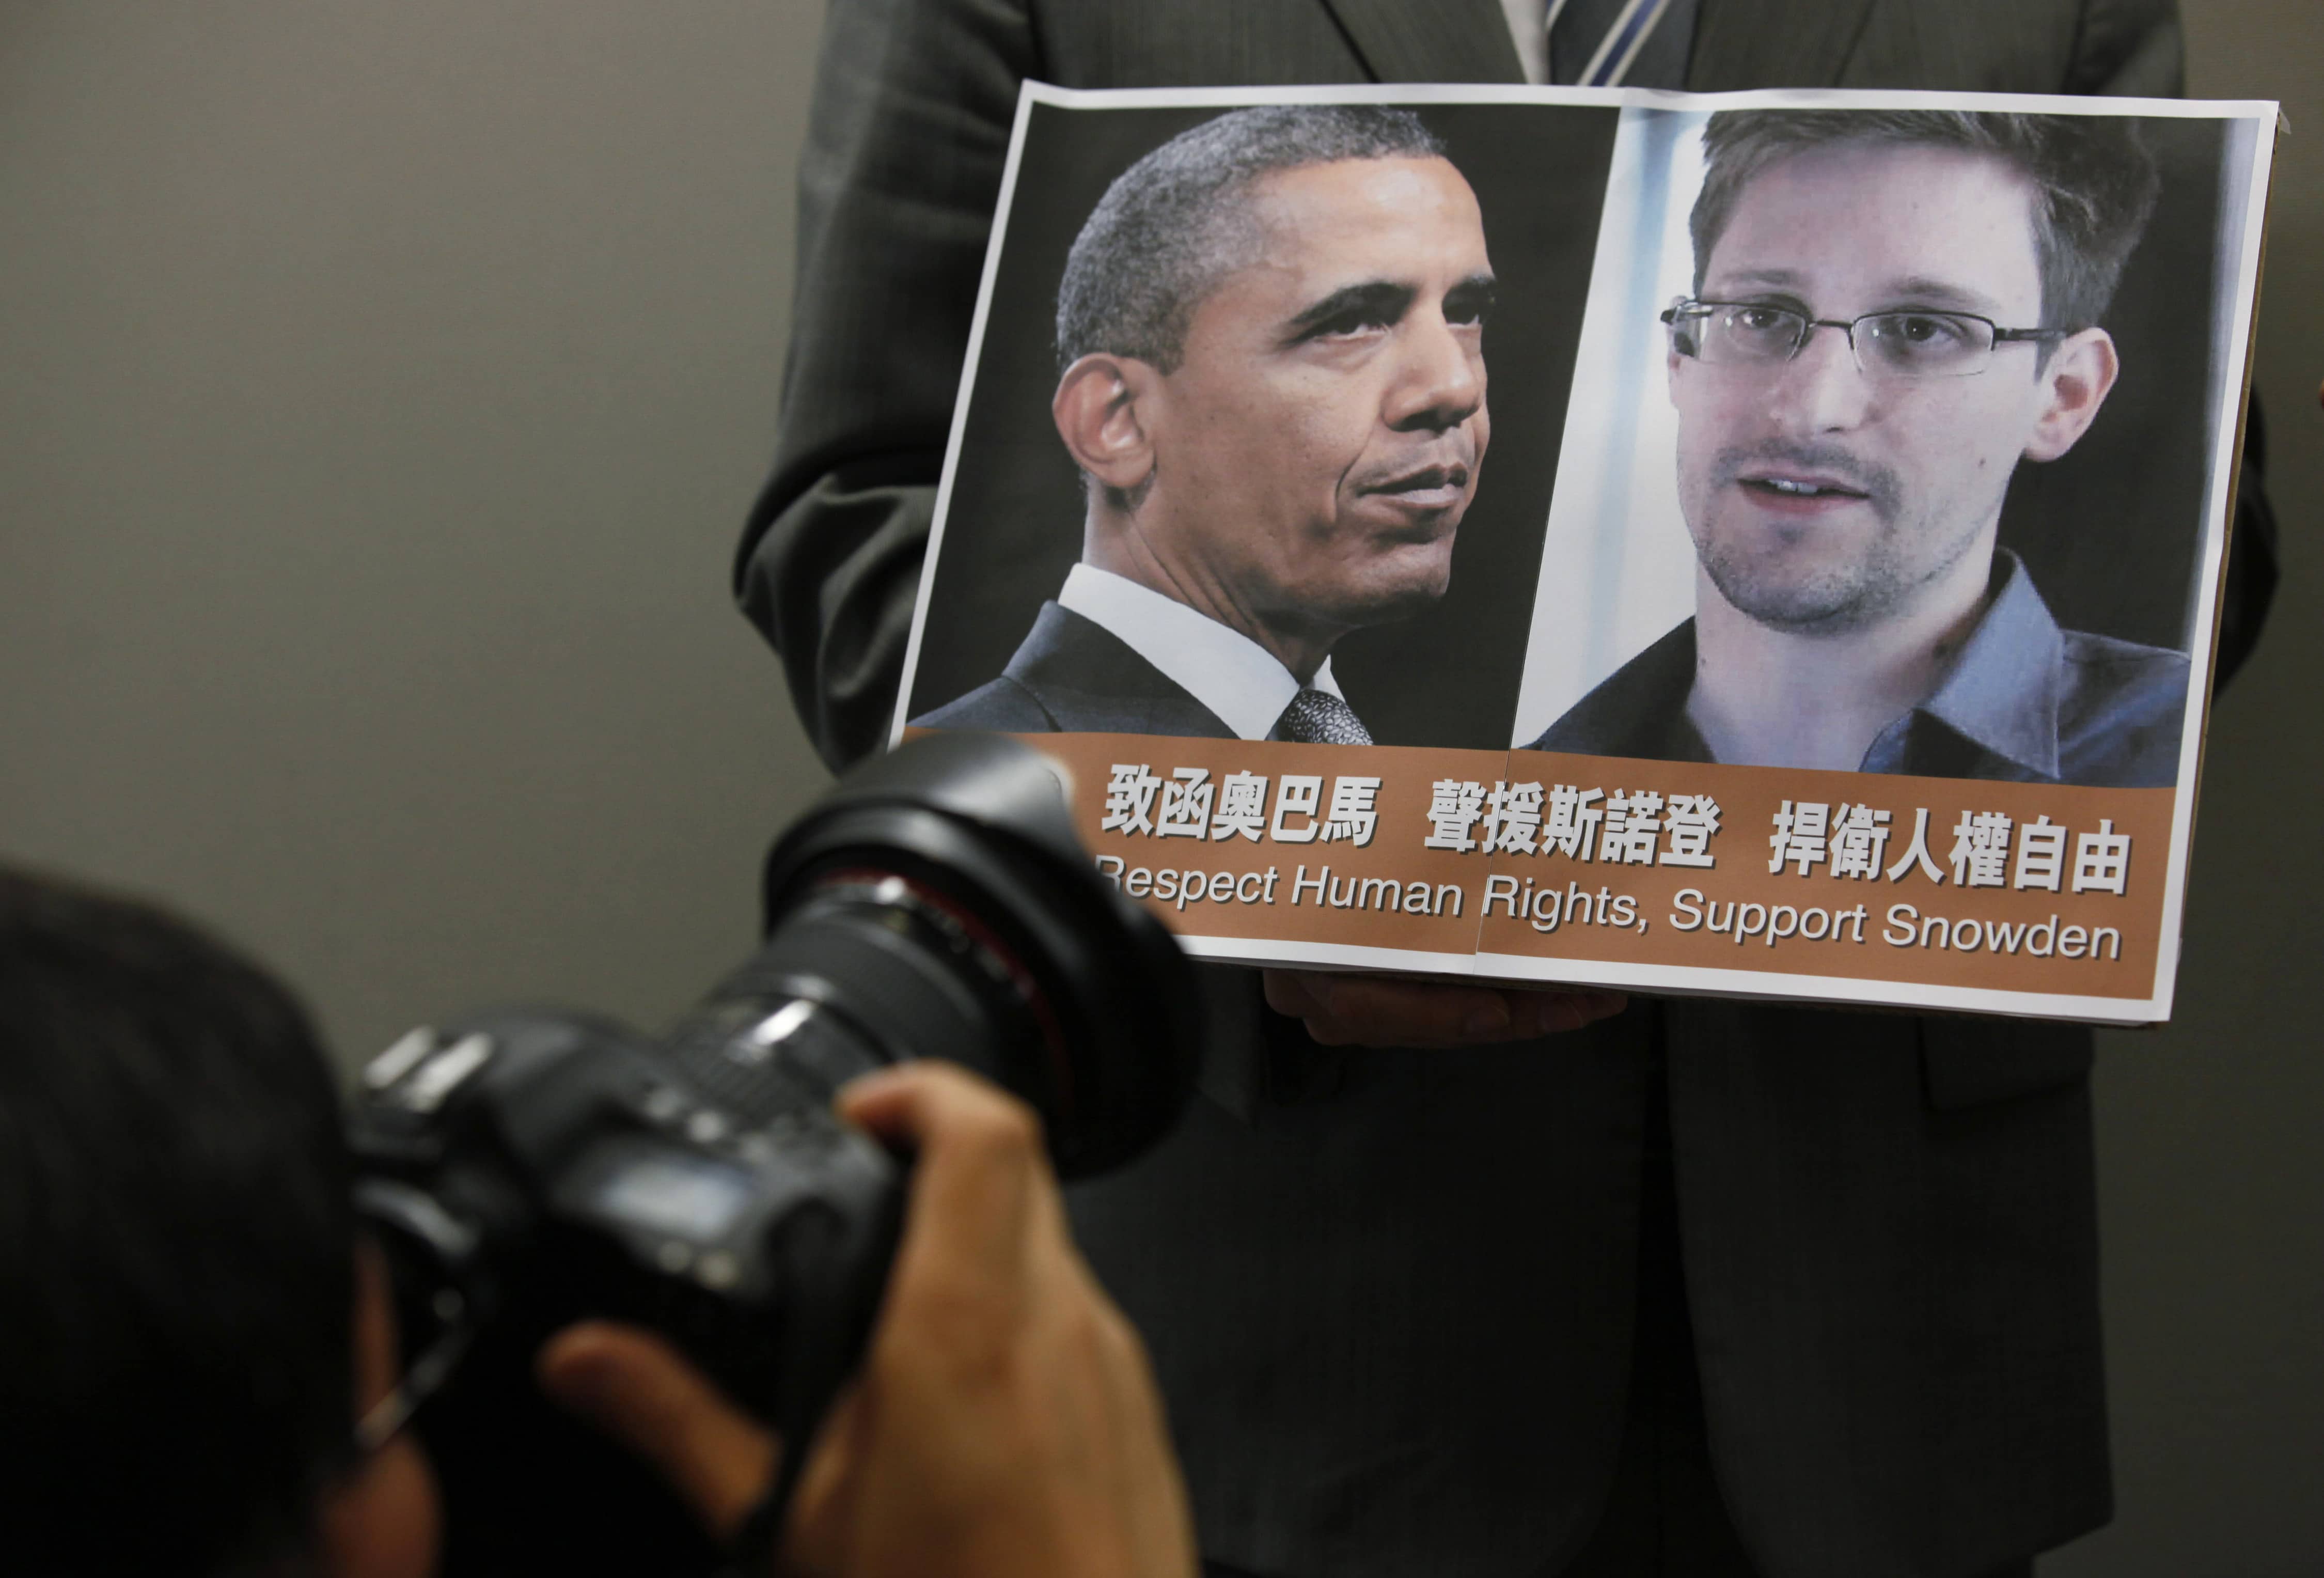 Images of President Barack Obama and Edward Snowden are held by a pro-democractic legislator during a news conference in Hong Kong in 2013, AP Photo/Kin Cheung, File